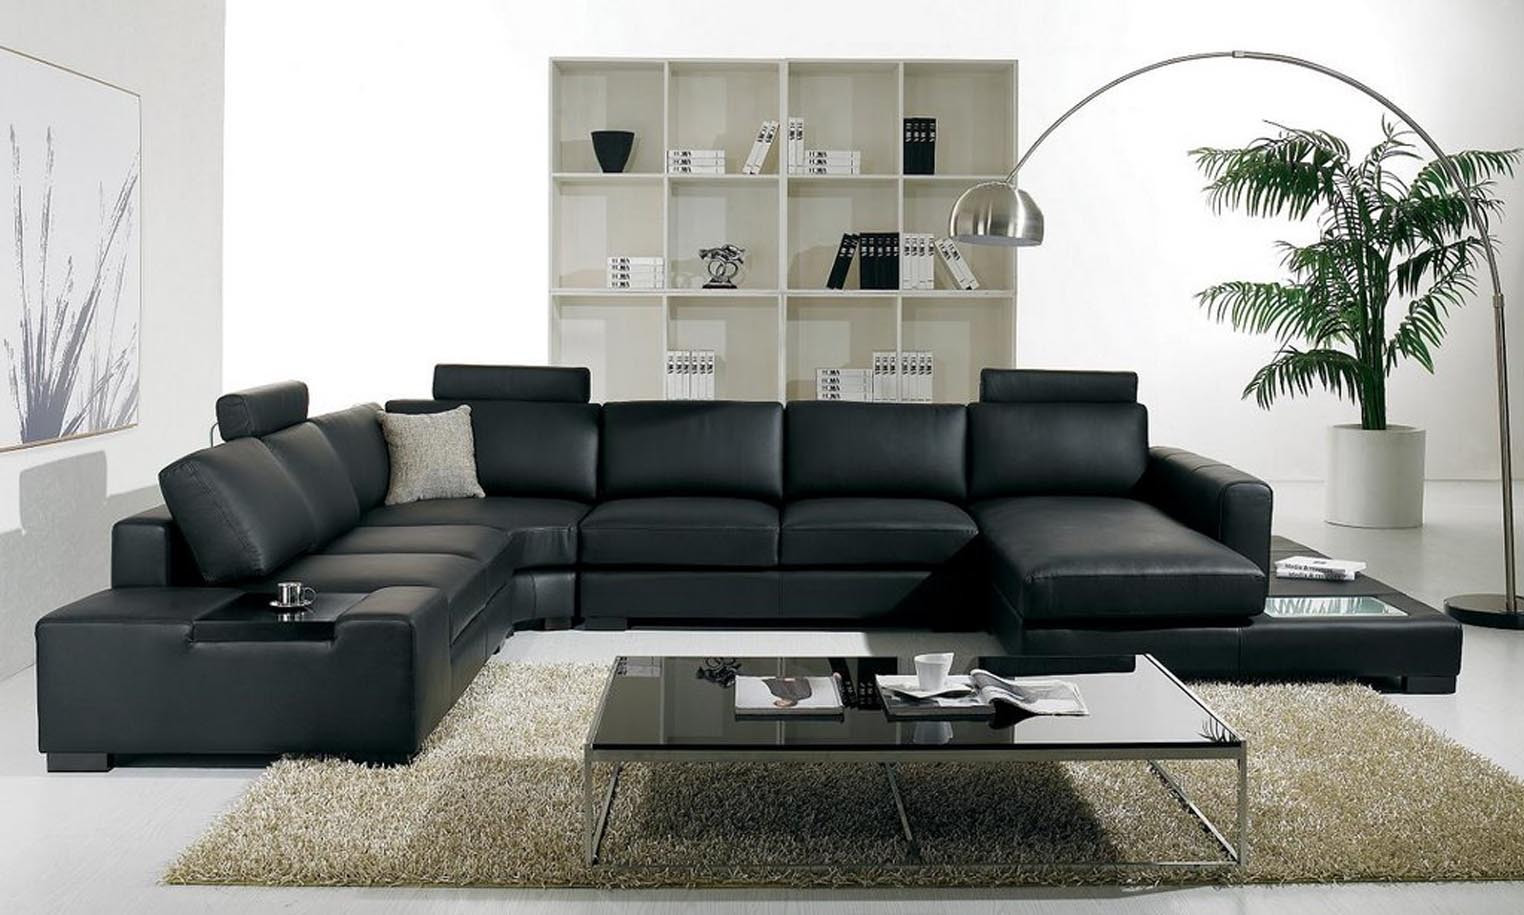 Black Furniture Living Room Ideas
 Simple Interior Design Tips To Make Over Your Living Room